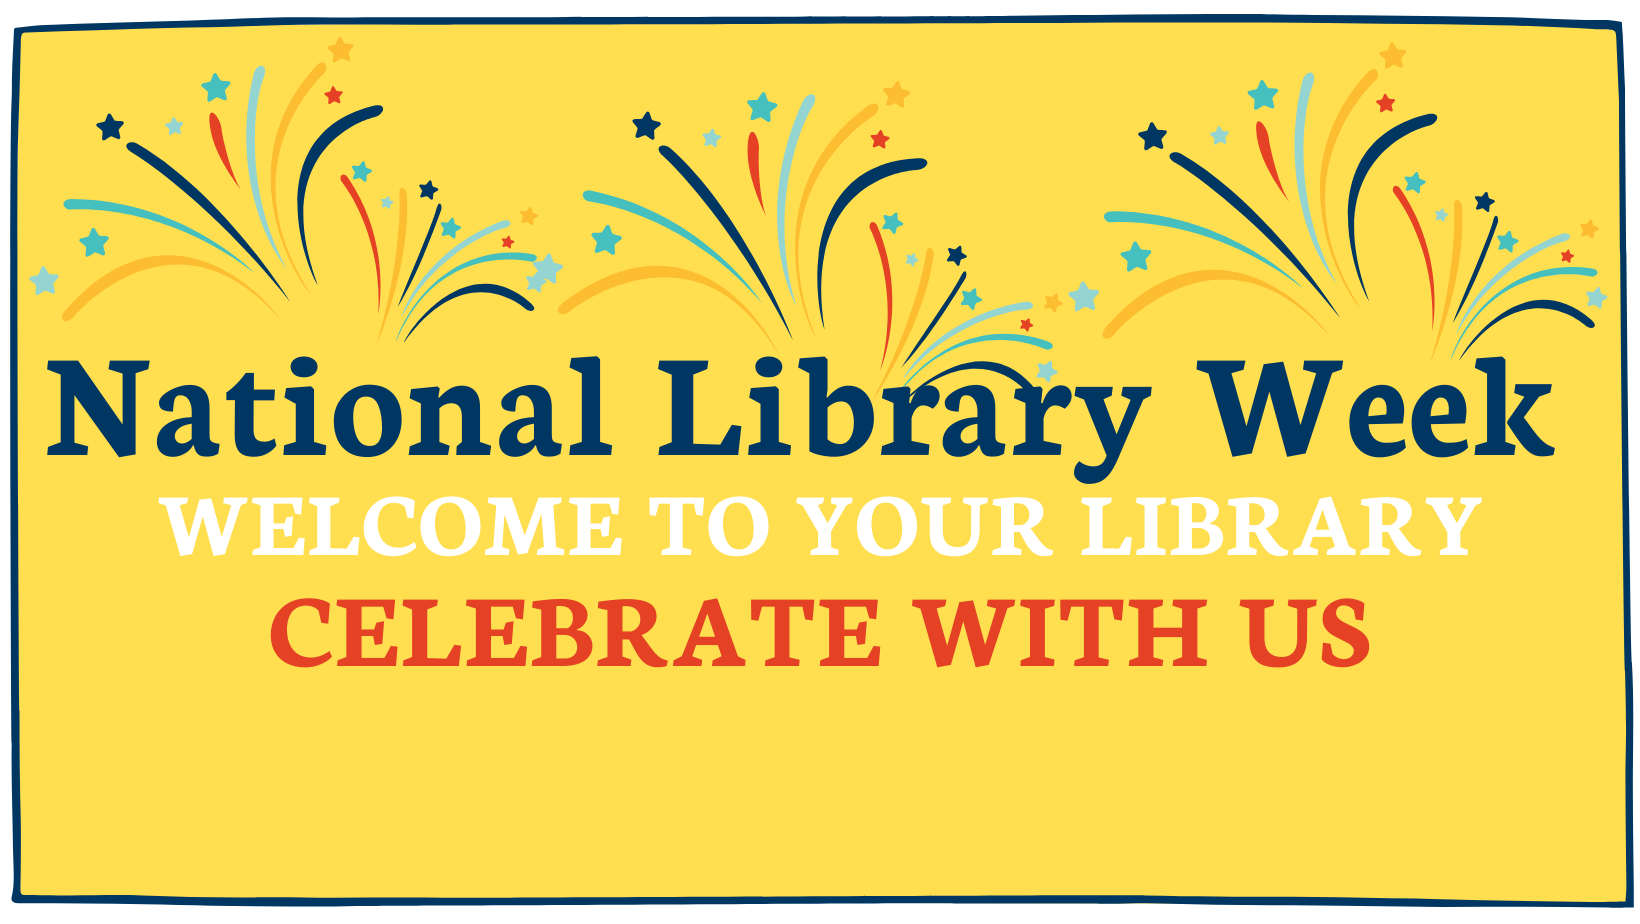 National Library Week at the Linden Public Library